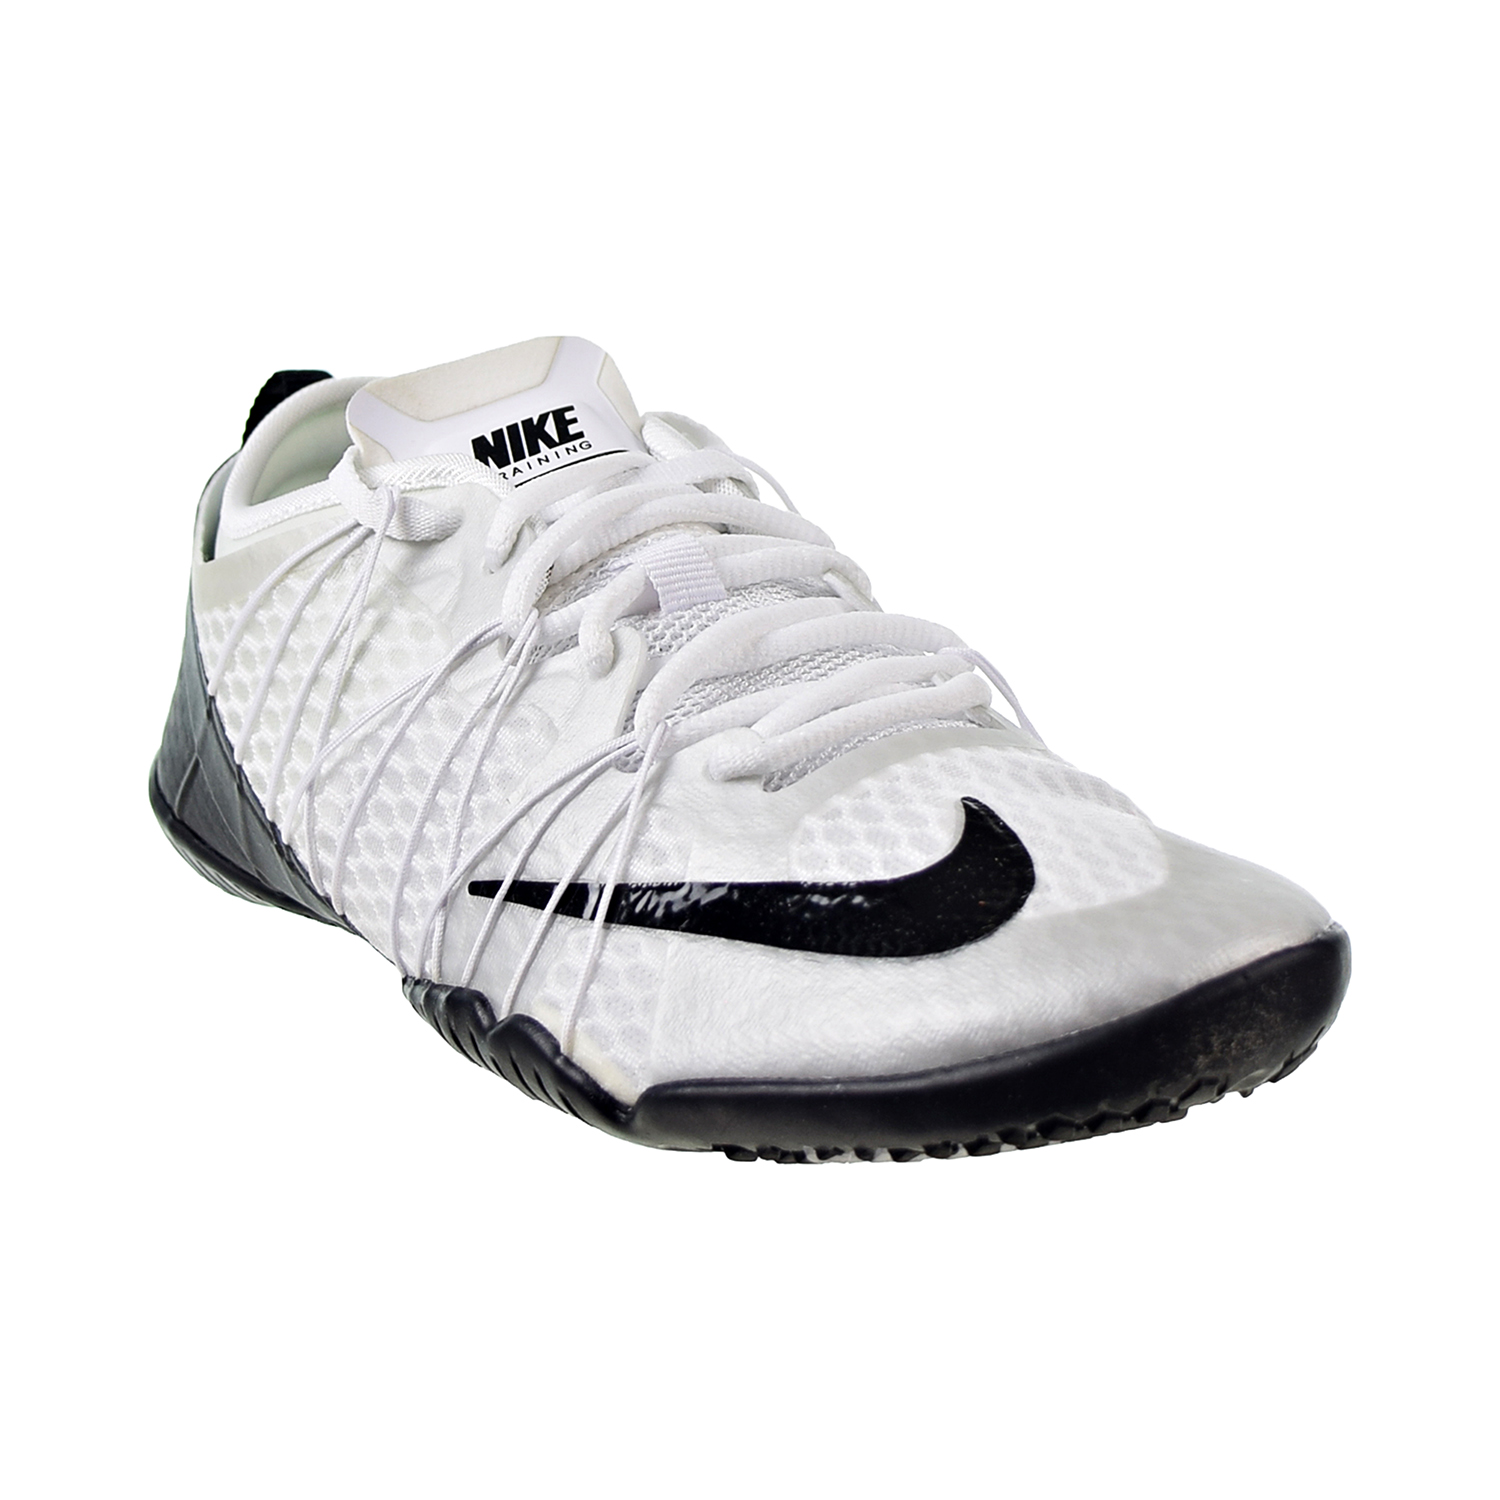 To position Pogo stick jump inch Nike Women's Free 1.0 Cross Bionic 2 Running Shoes White-Black 718841-100